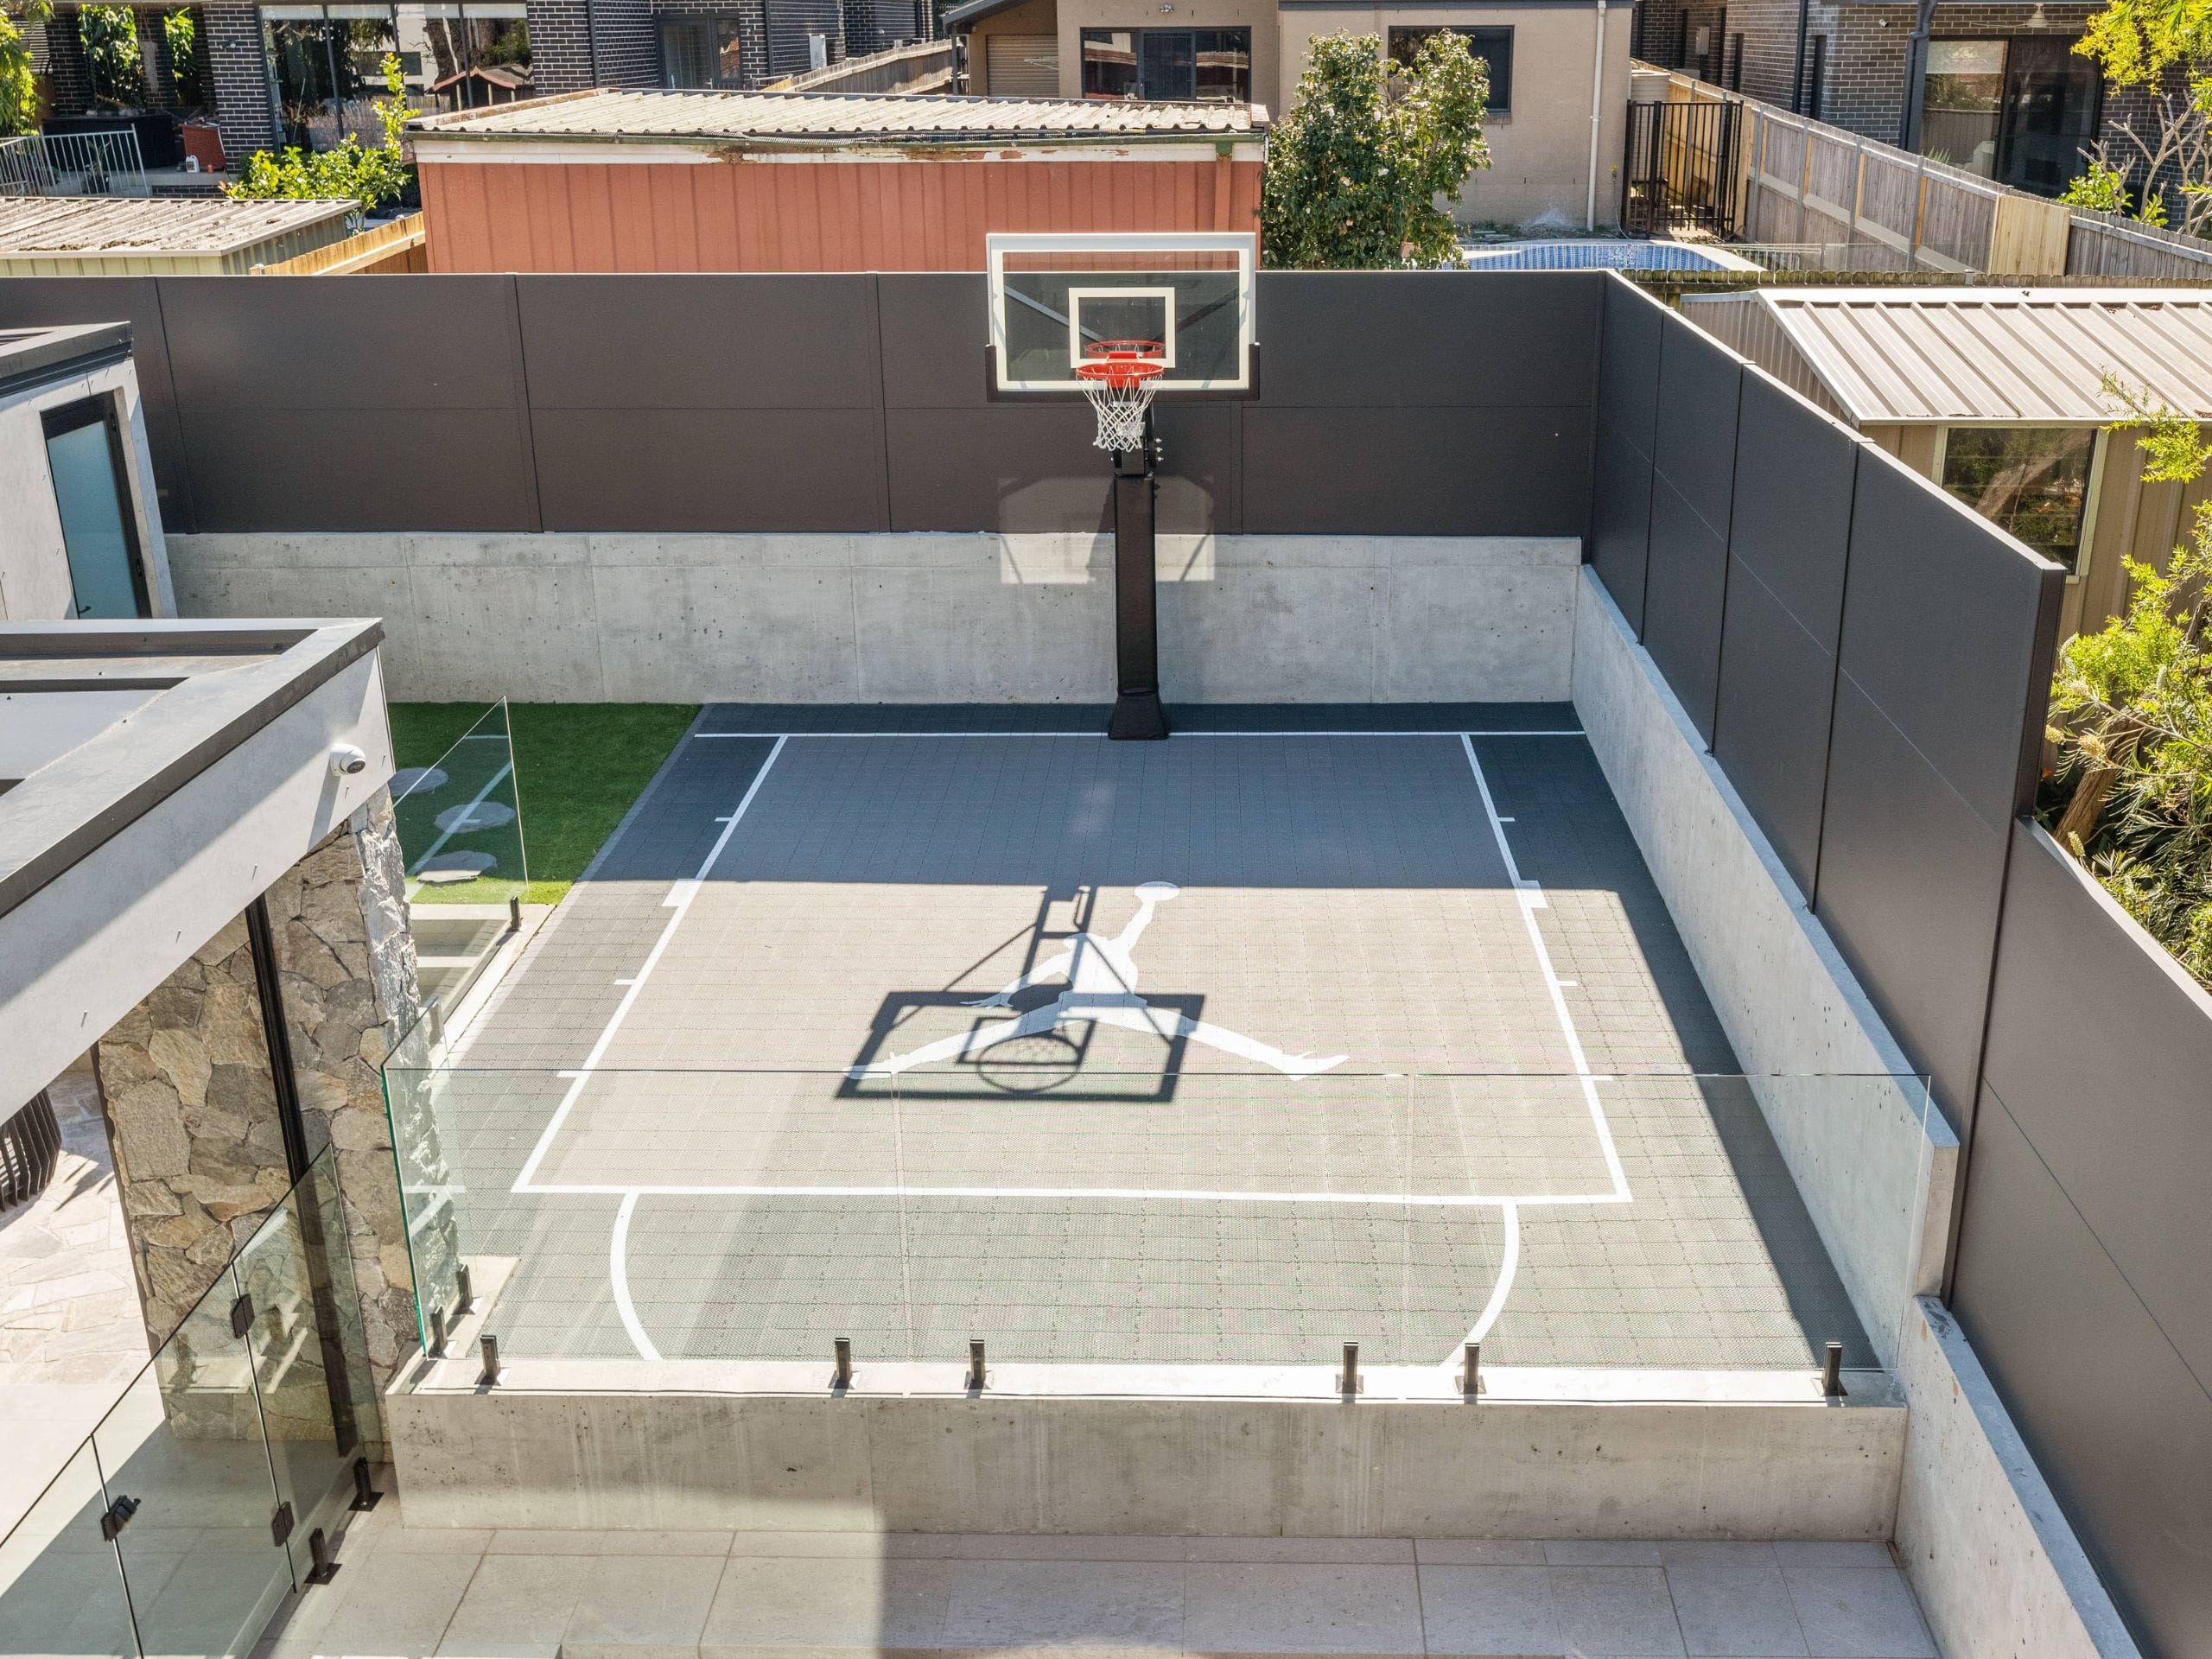 A basketball court can provide hours of outdoor enjoyment